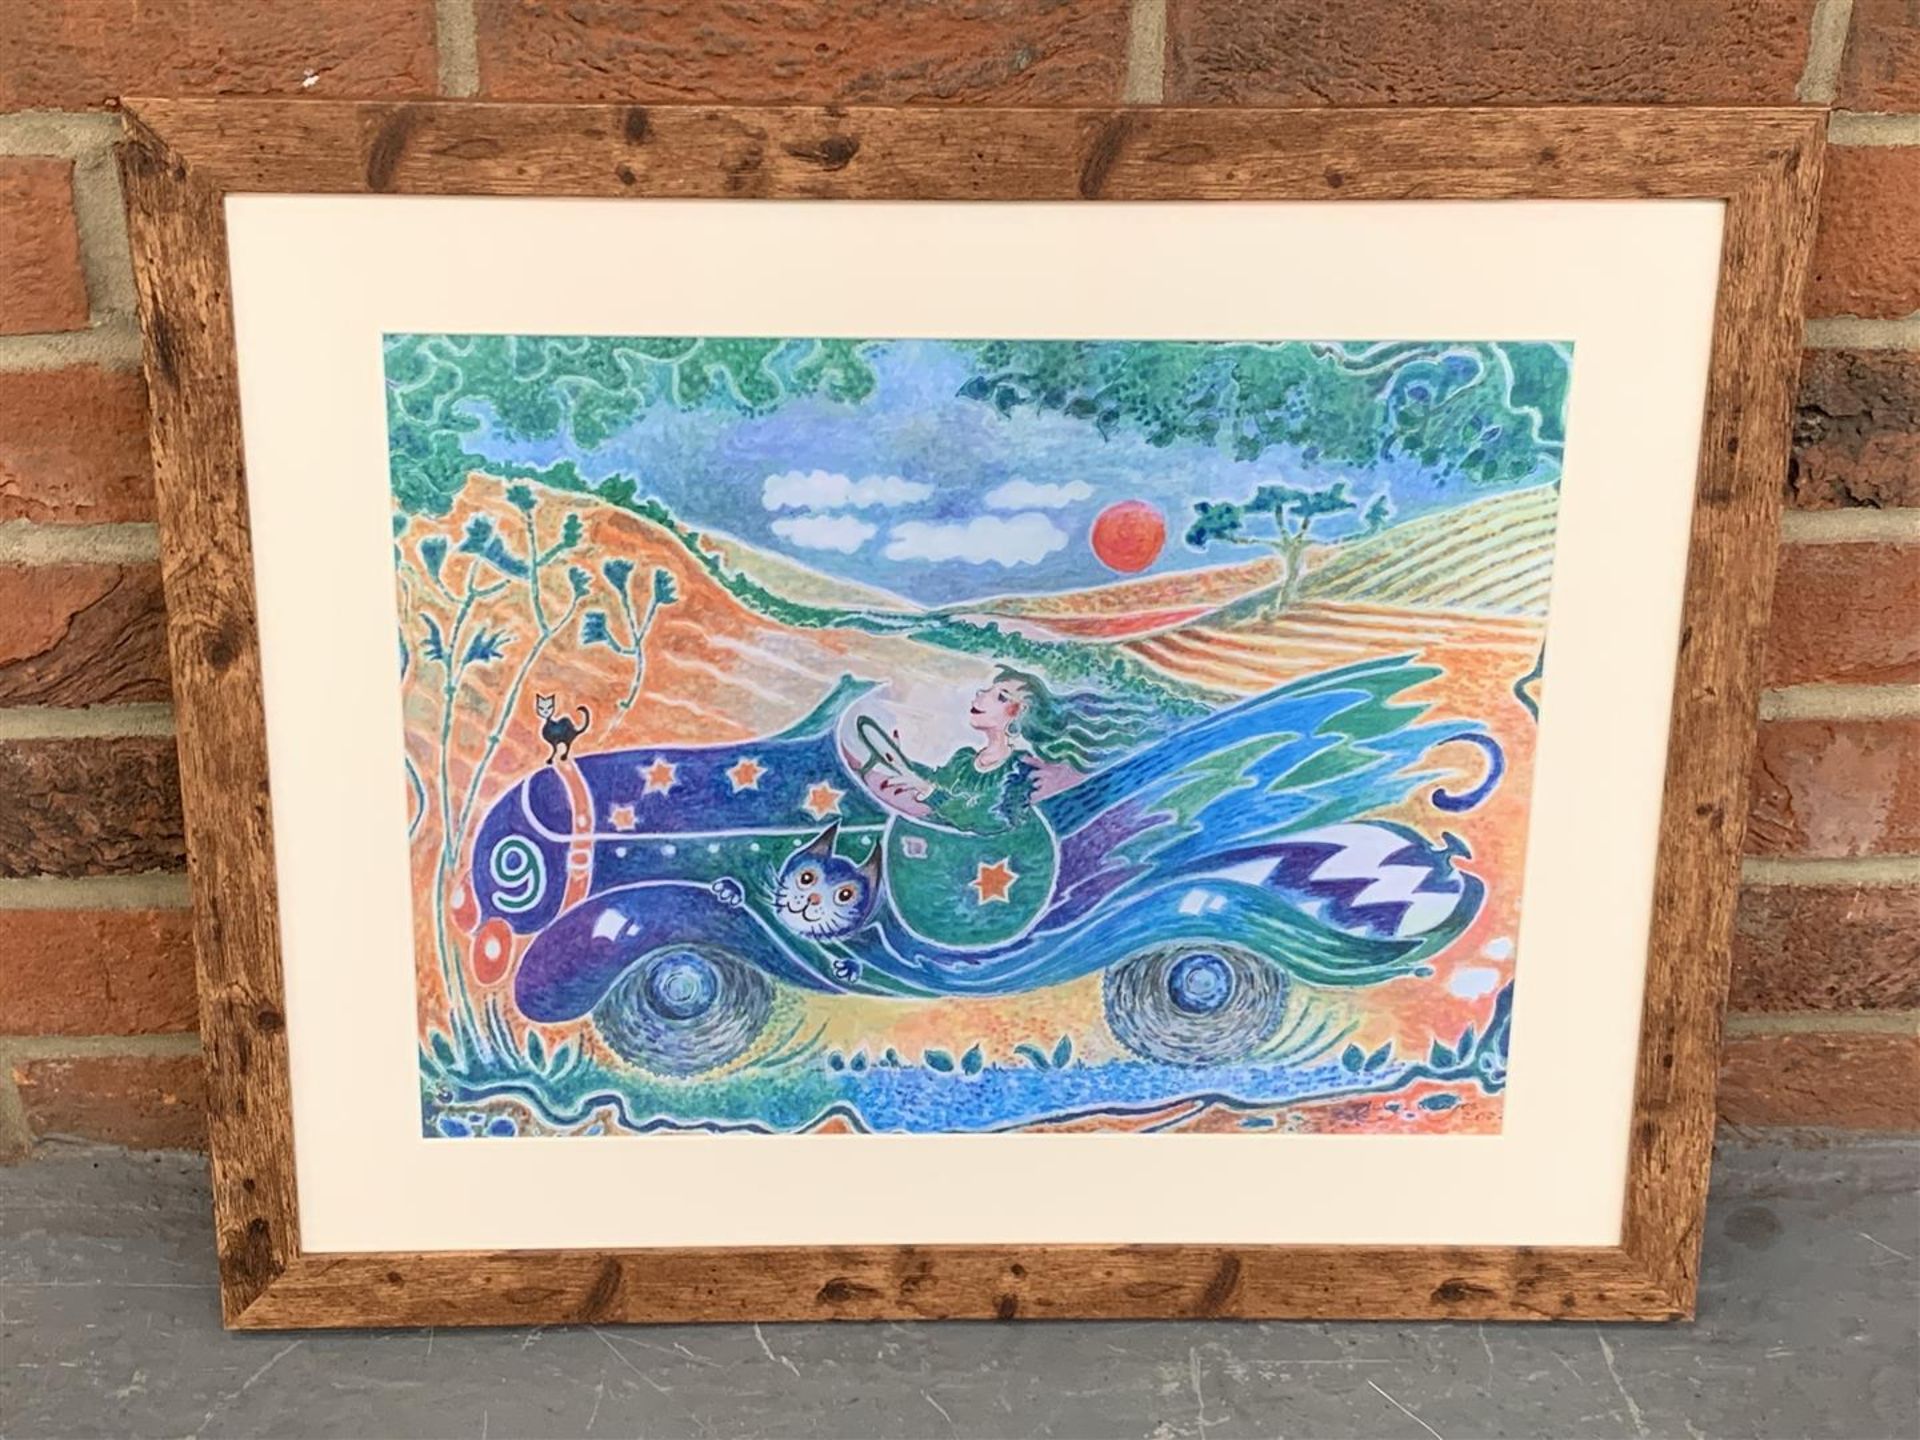 A Print Illustration A Purr-fect Day For A drive" By Gillian Mayes"